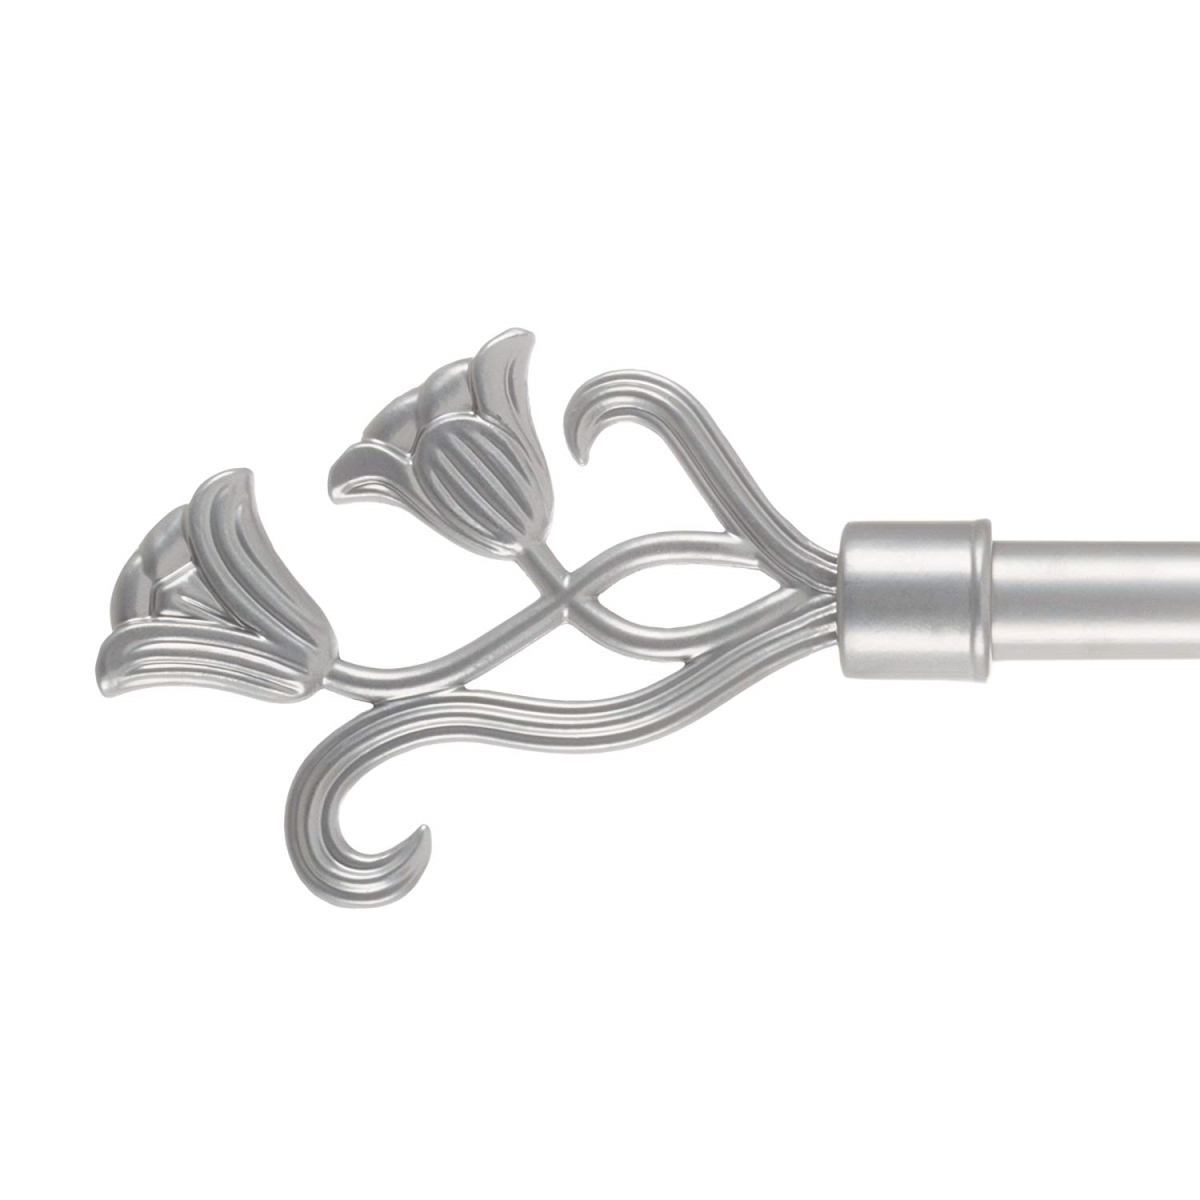 63a-46955 Lavish Home Curtain Rod With Mounting Hardware & Decorative Floral Finials, Silver - 66-144 In.